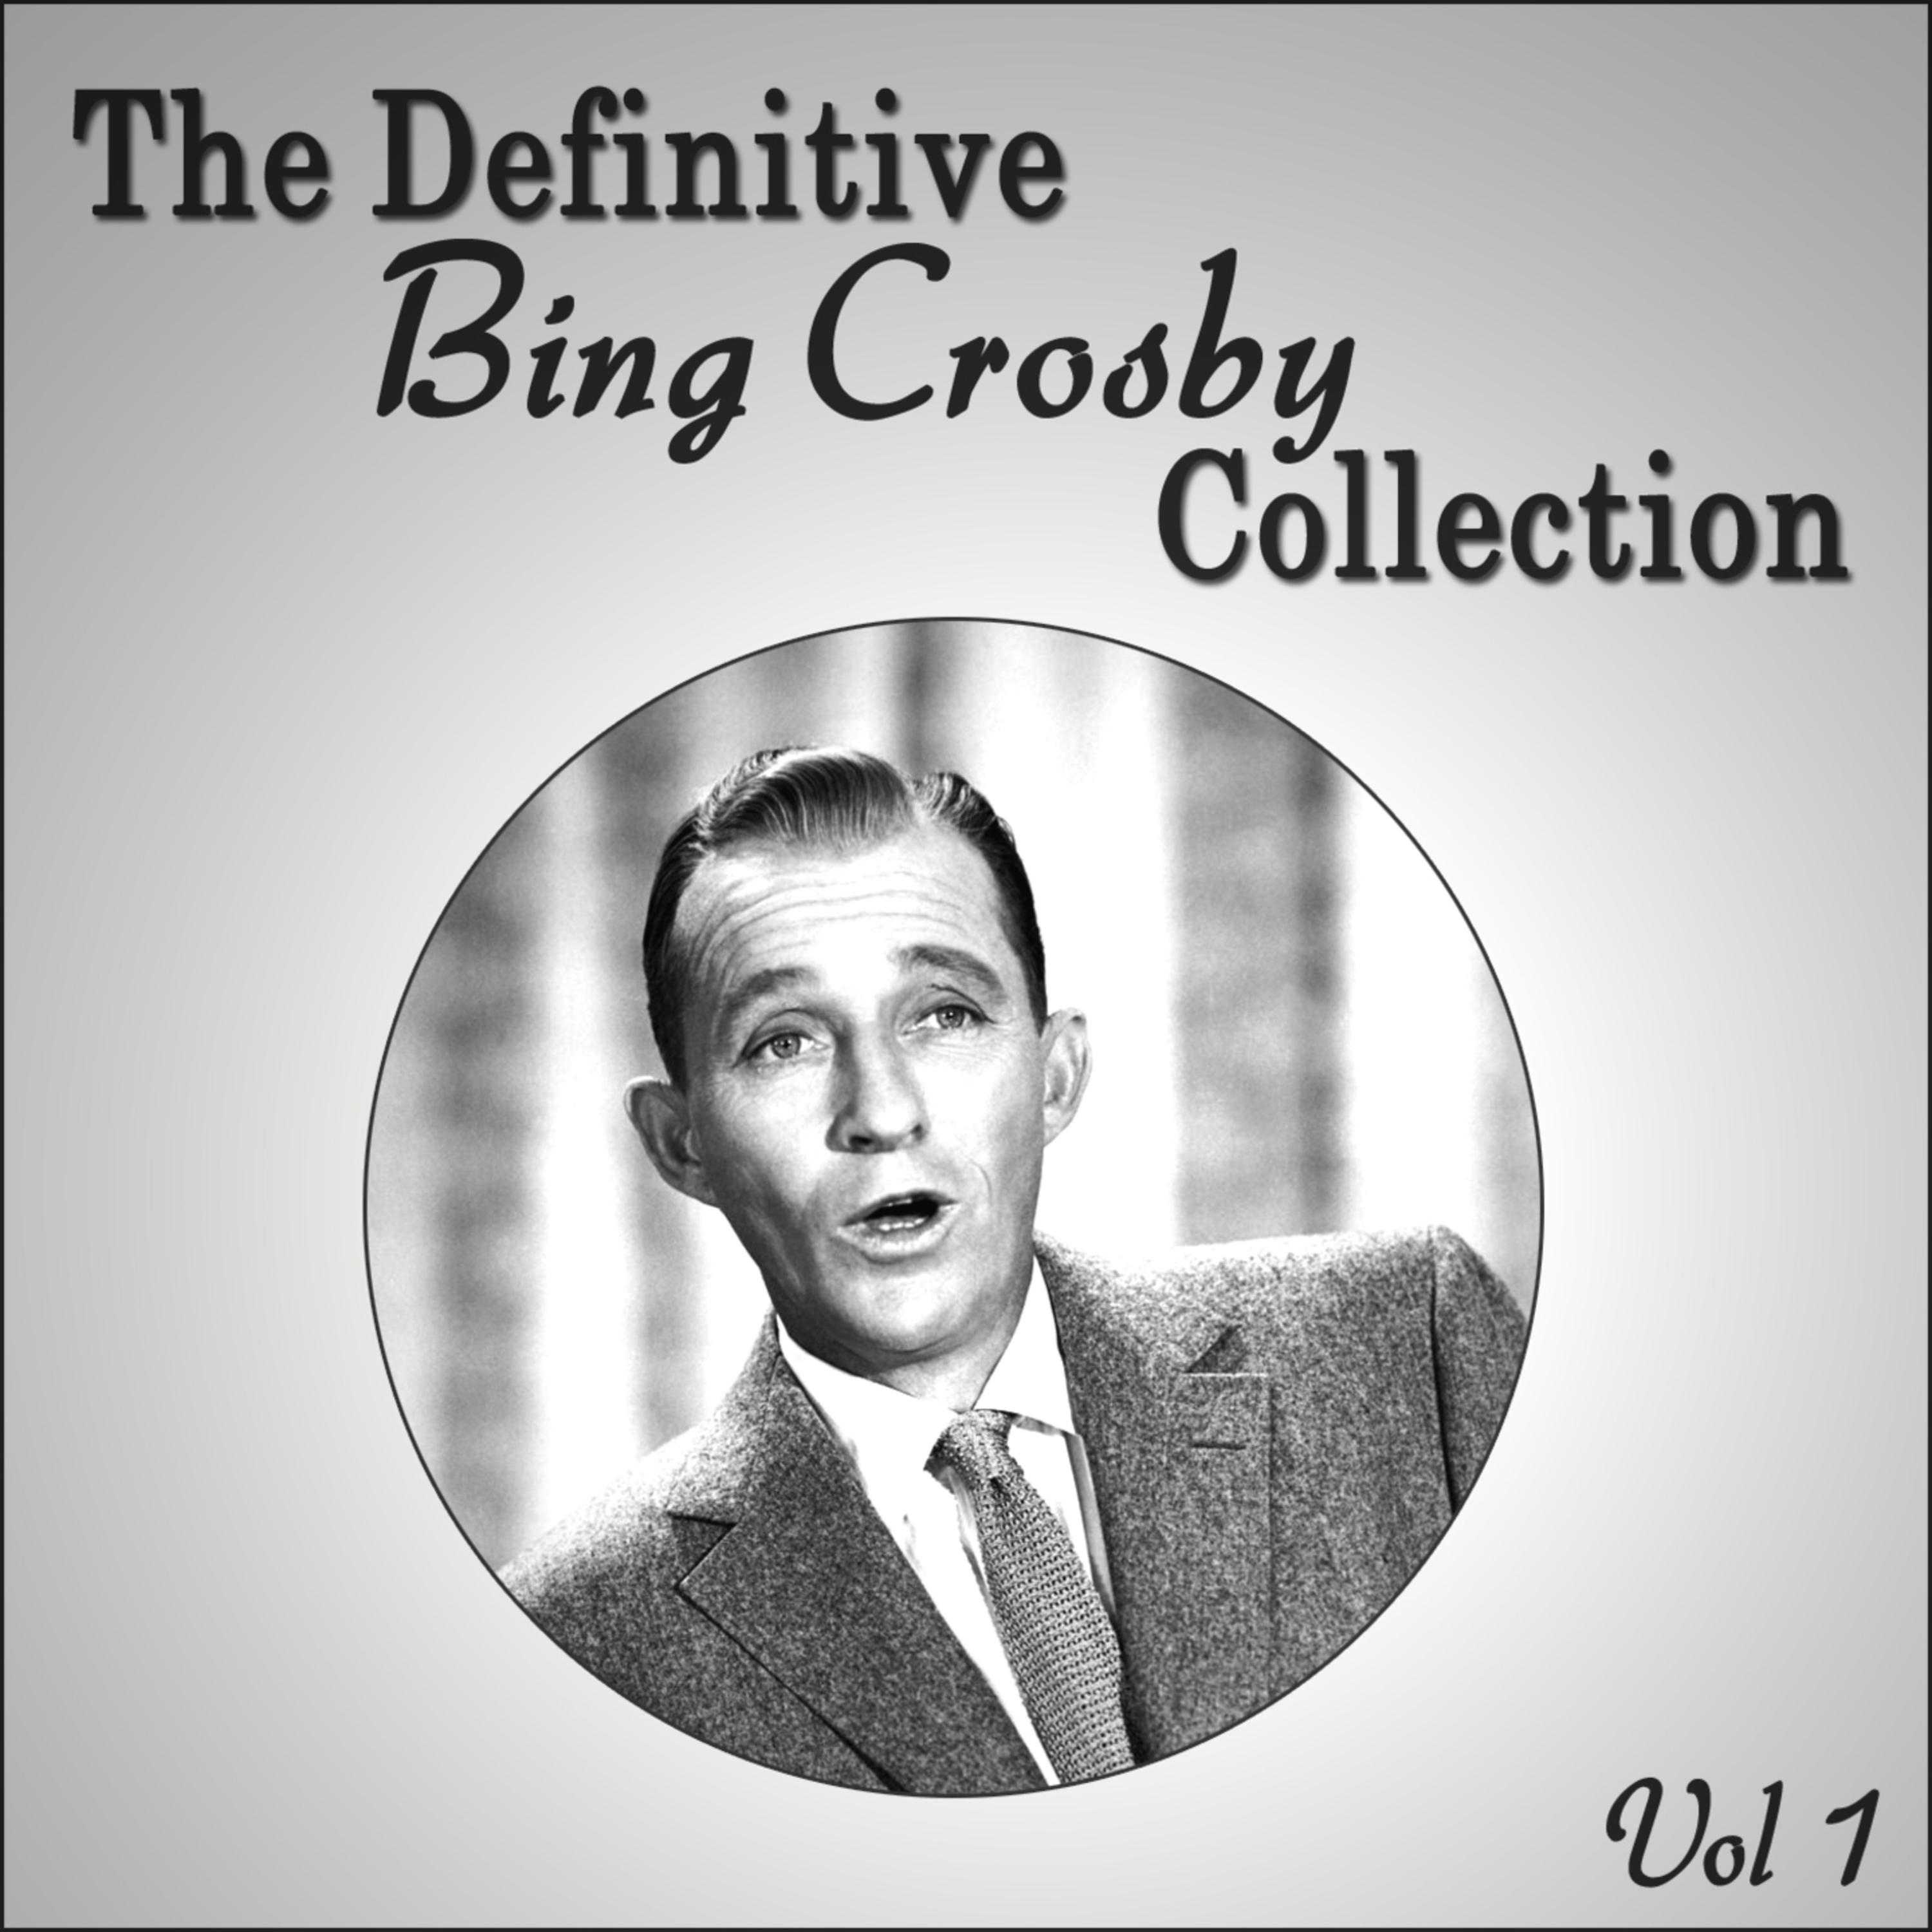 The Definitive Bing Crosby Collection - Vol 1